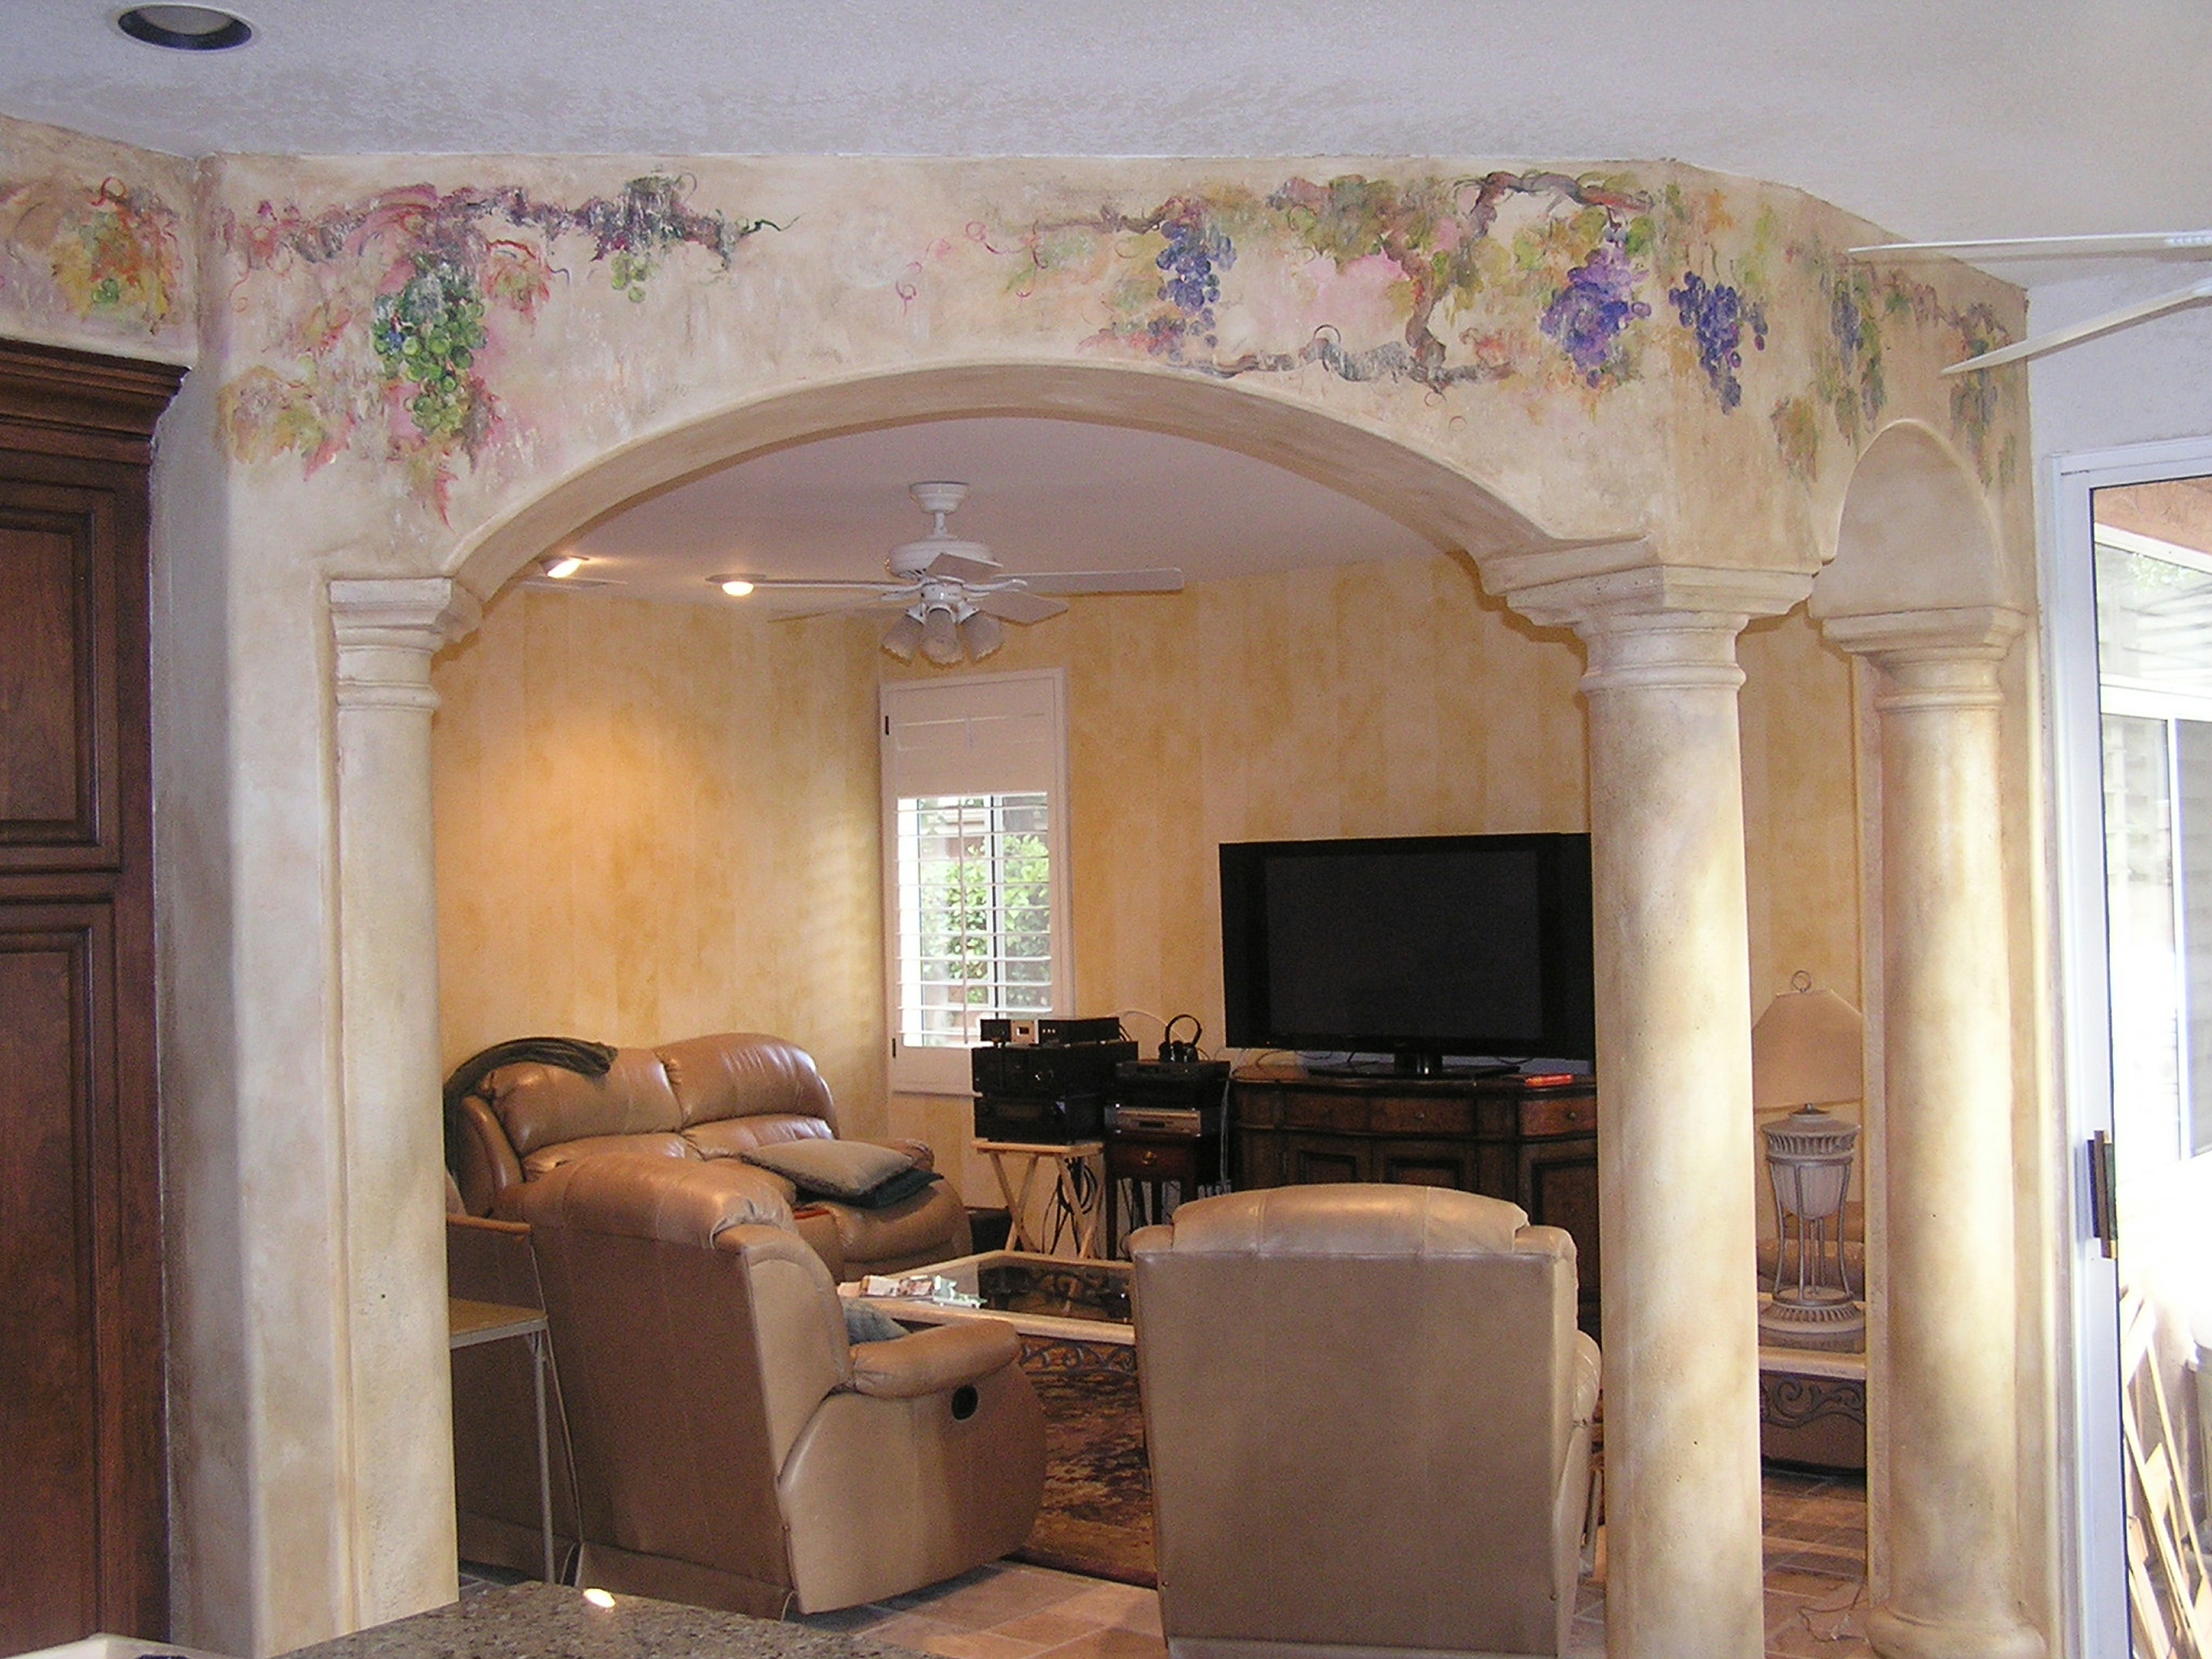 Hand painted decorative Grape Vines over textured faux finished wall - By Lisa Bryant